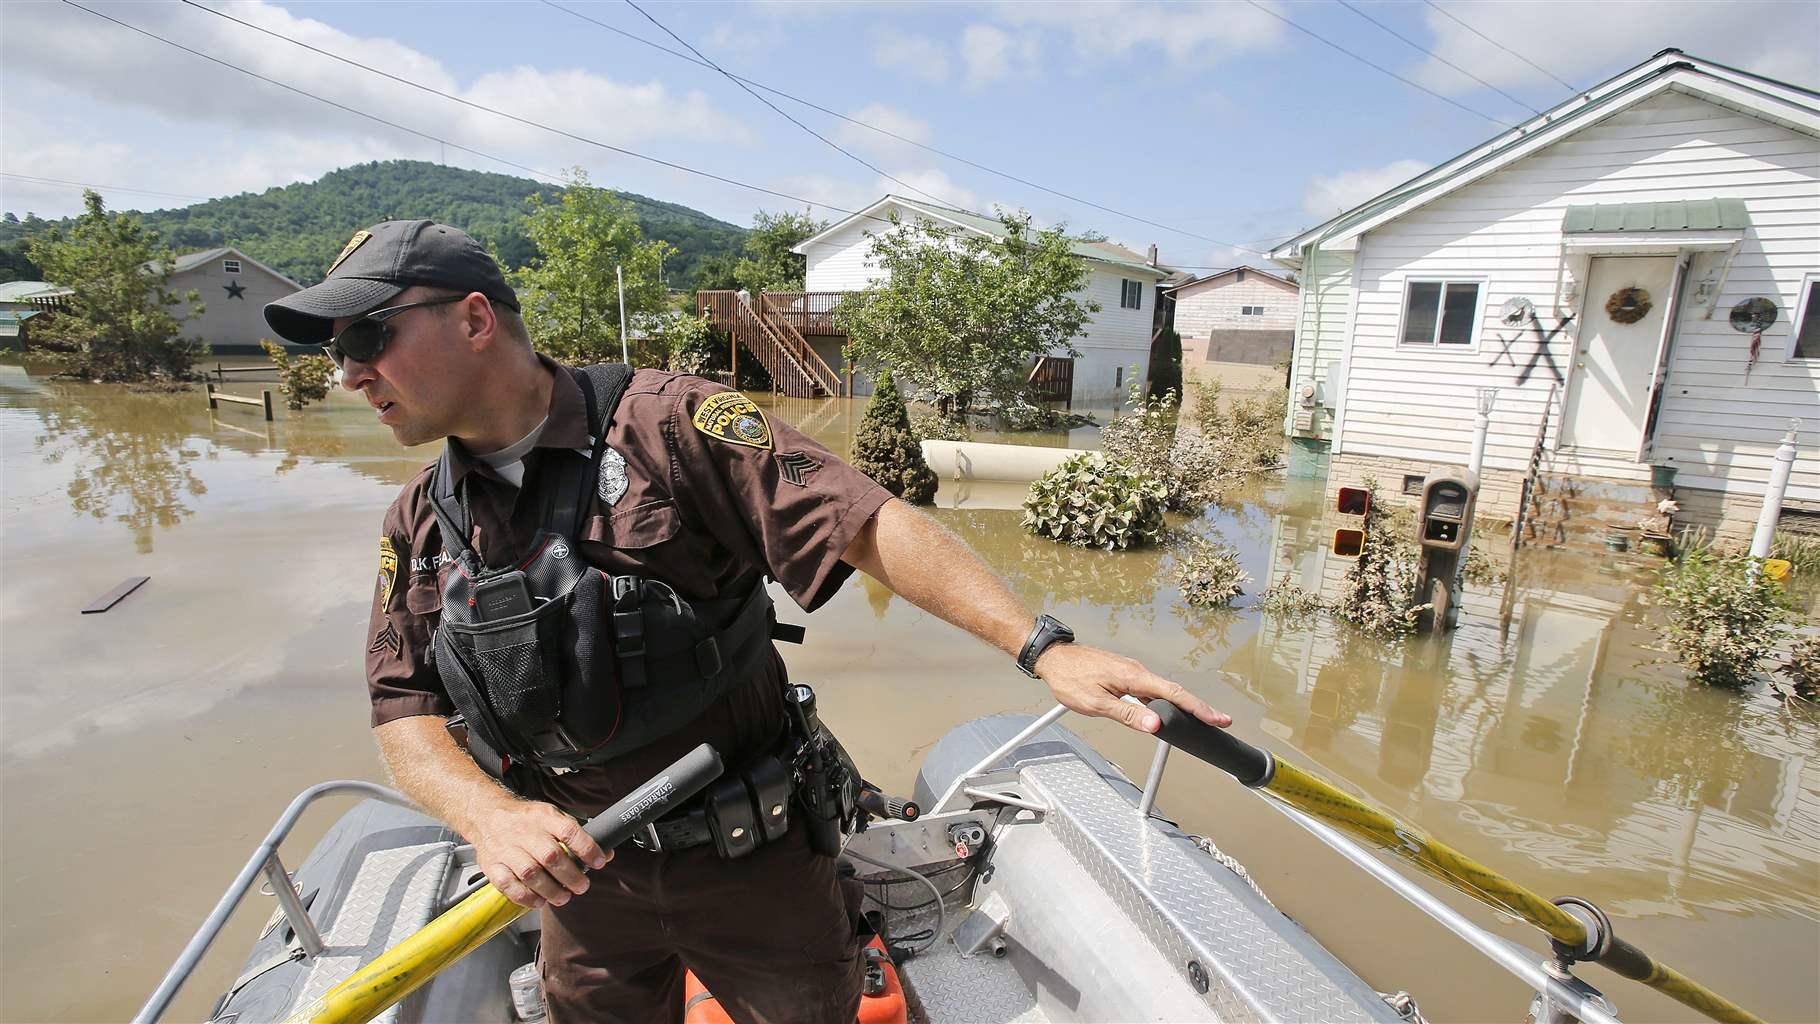 A natural resource officer navigates a small boat past houses on a flooded street.  